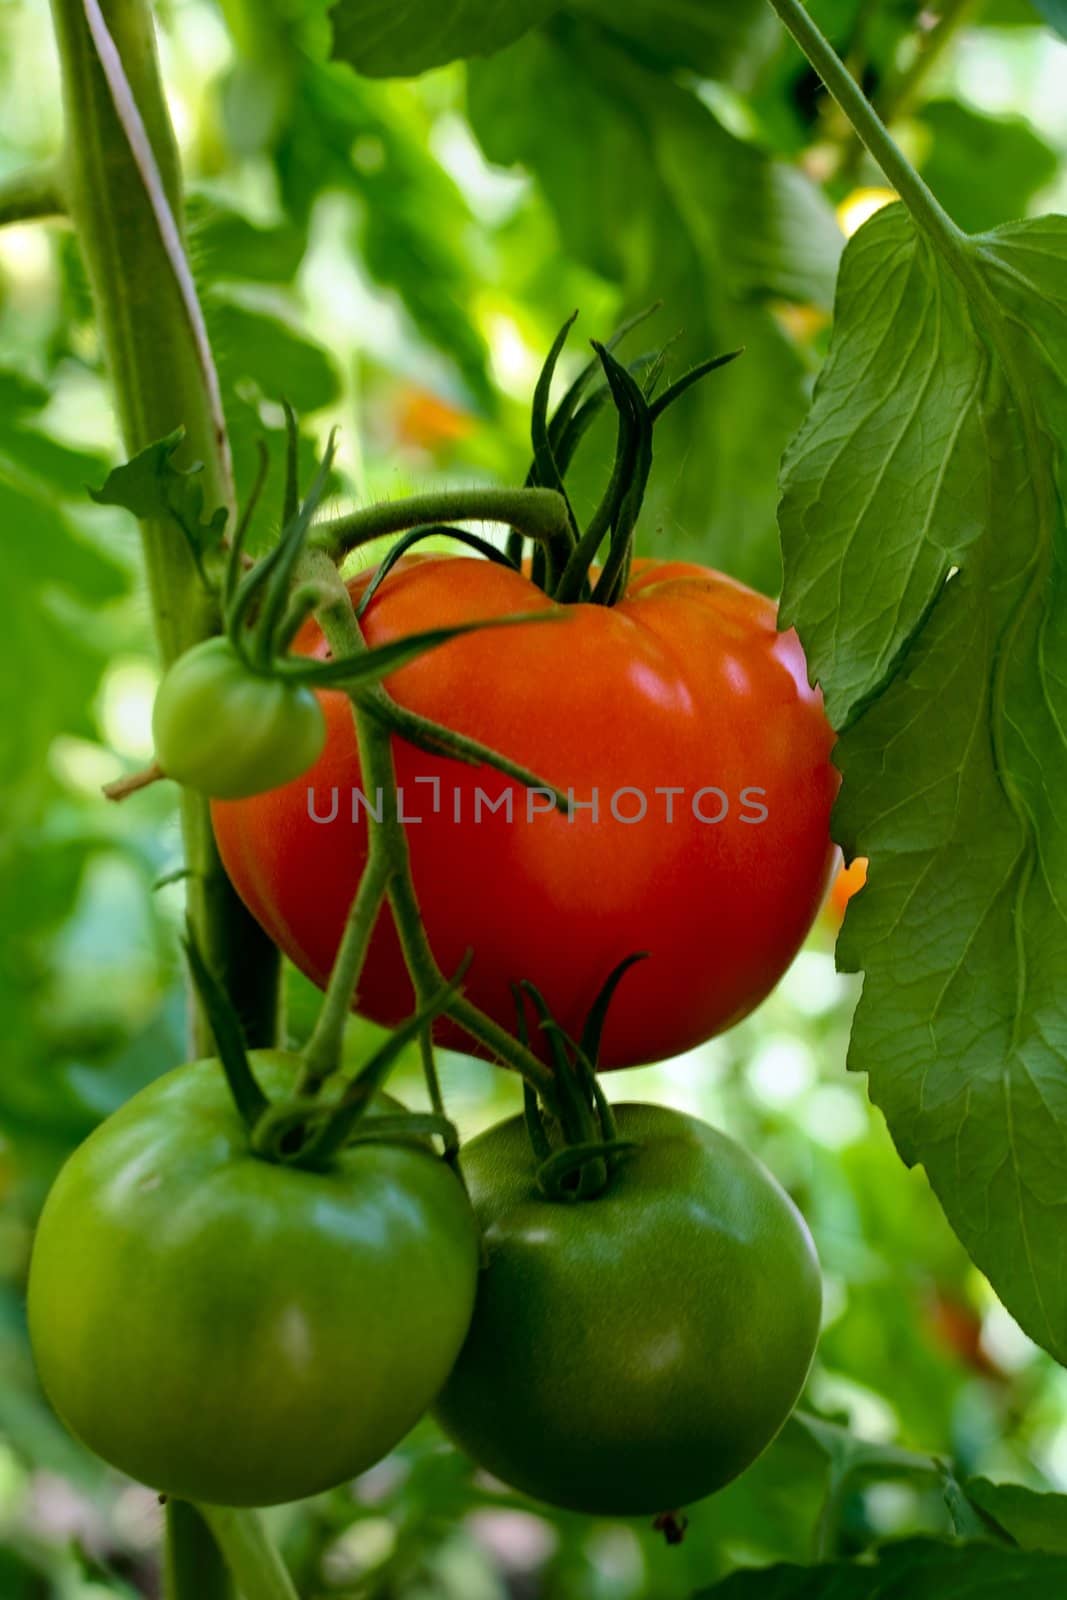 Group of red and green tomatoes in greenhouses.